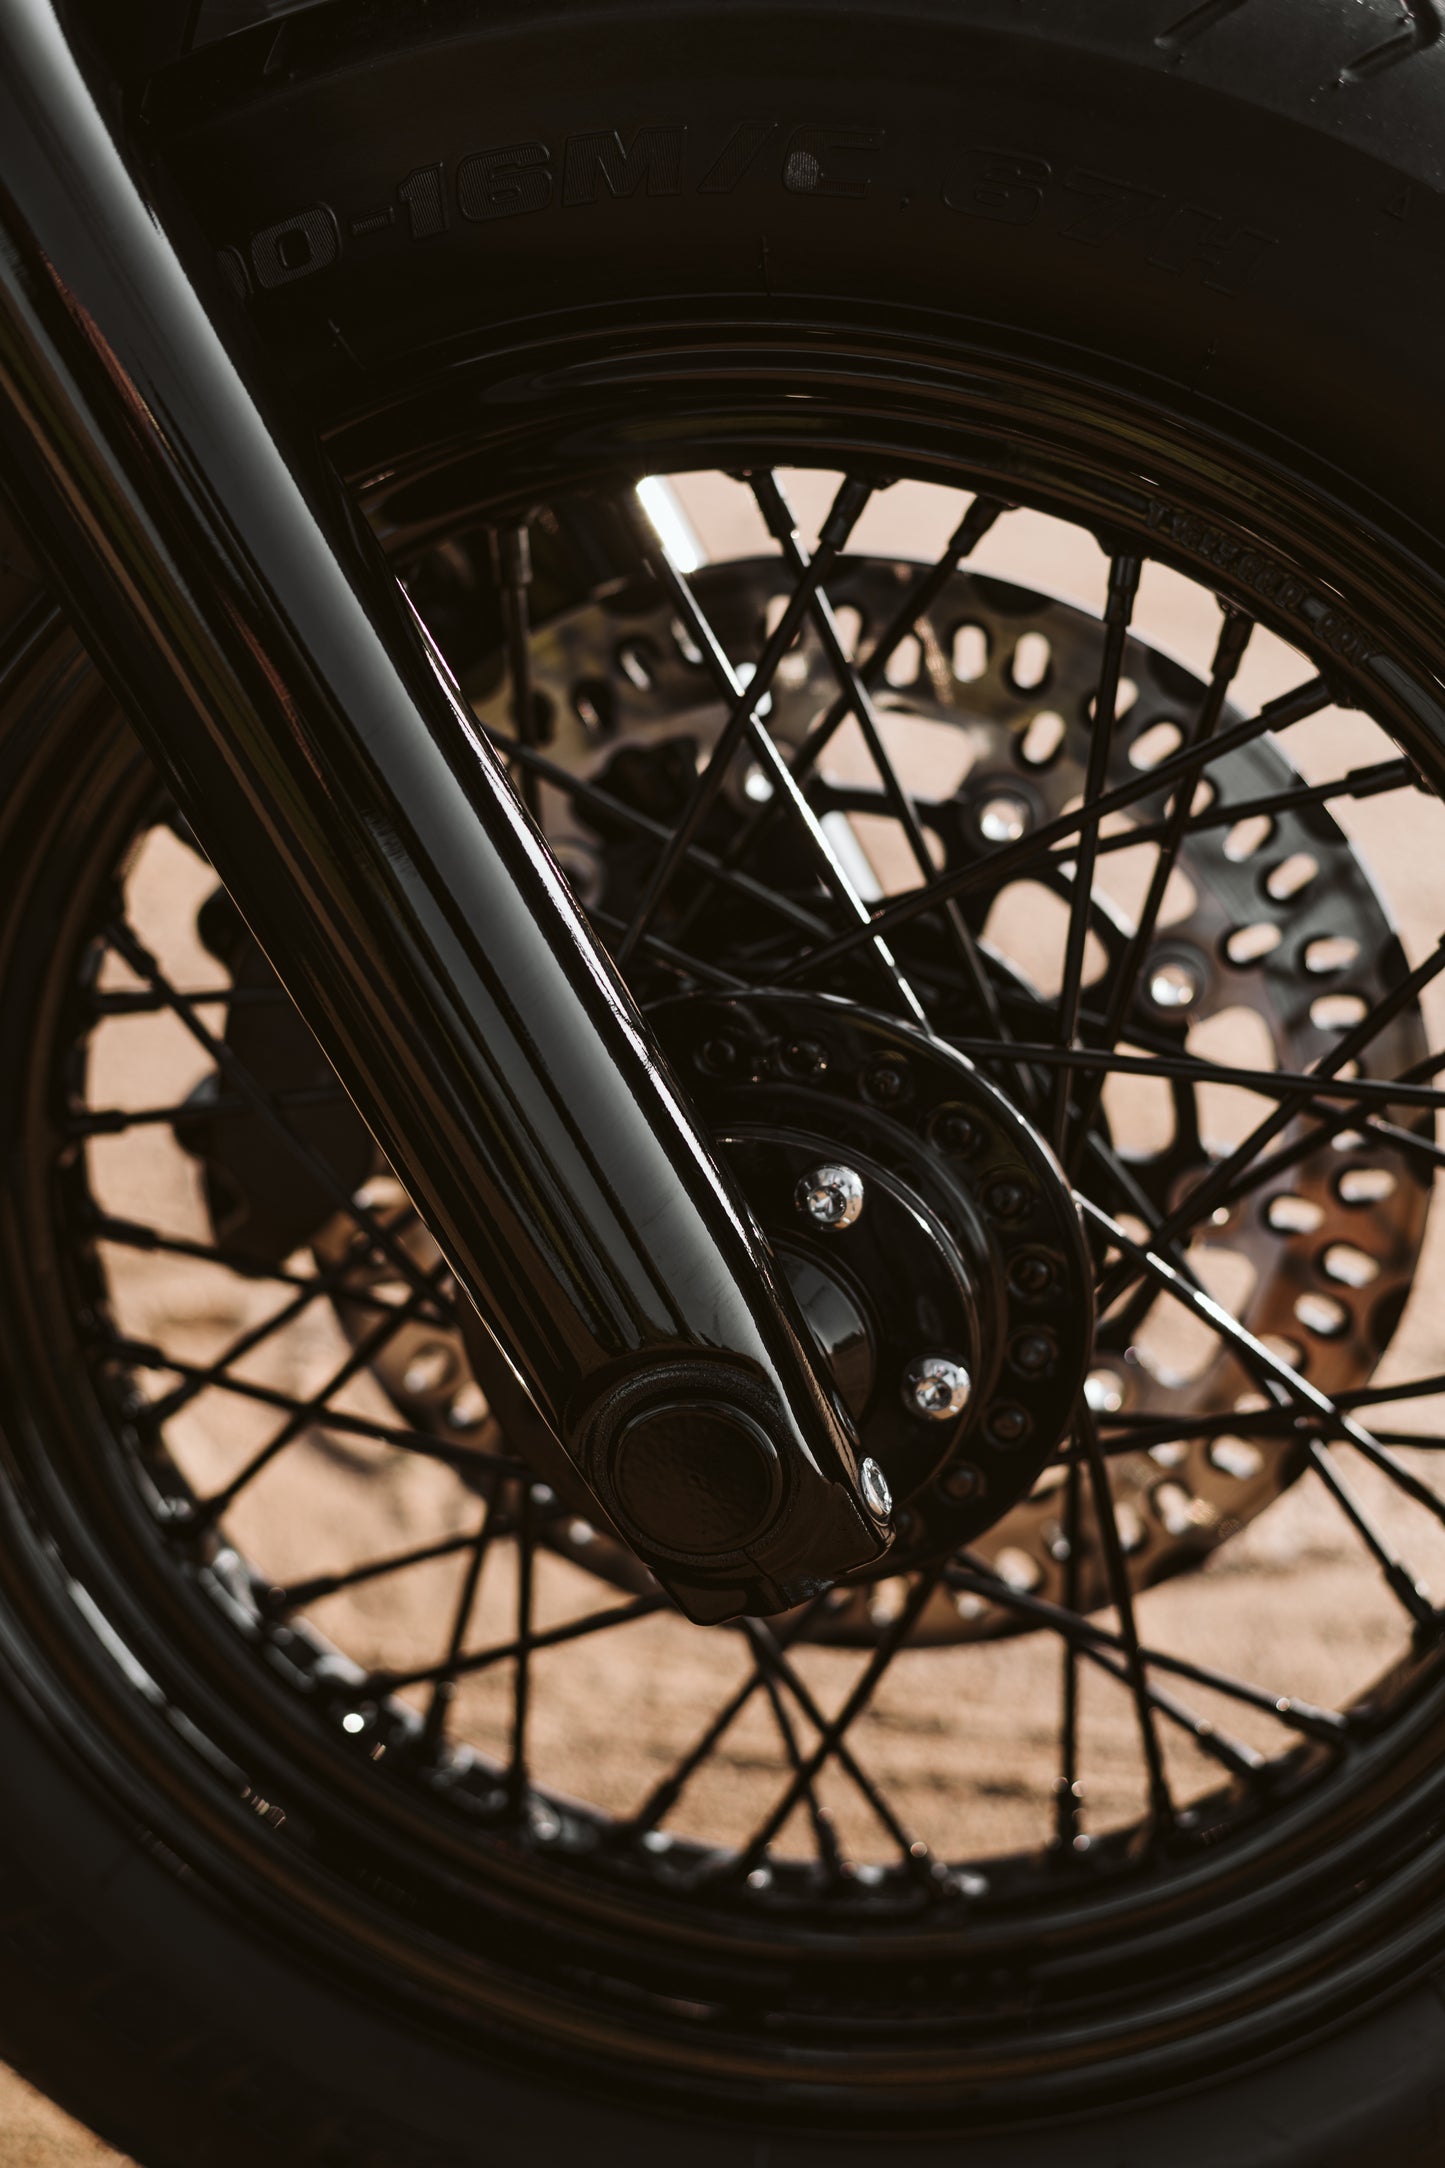 Zoomed Harley Davidson motorcycle with Killer Custom front wheel spacer kit blurry background